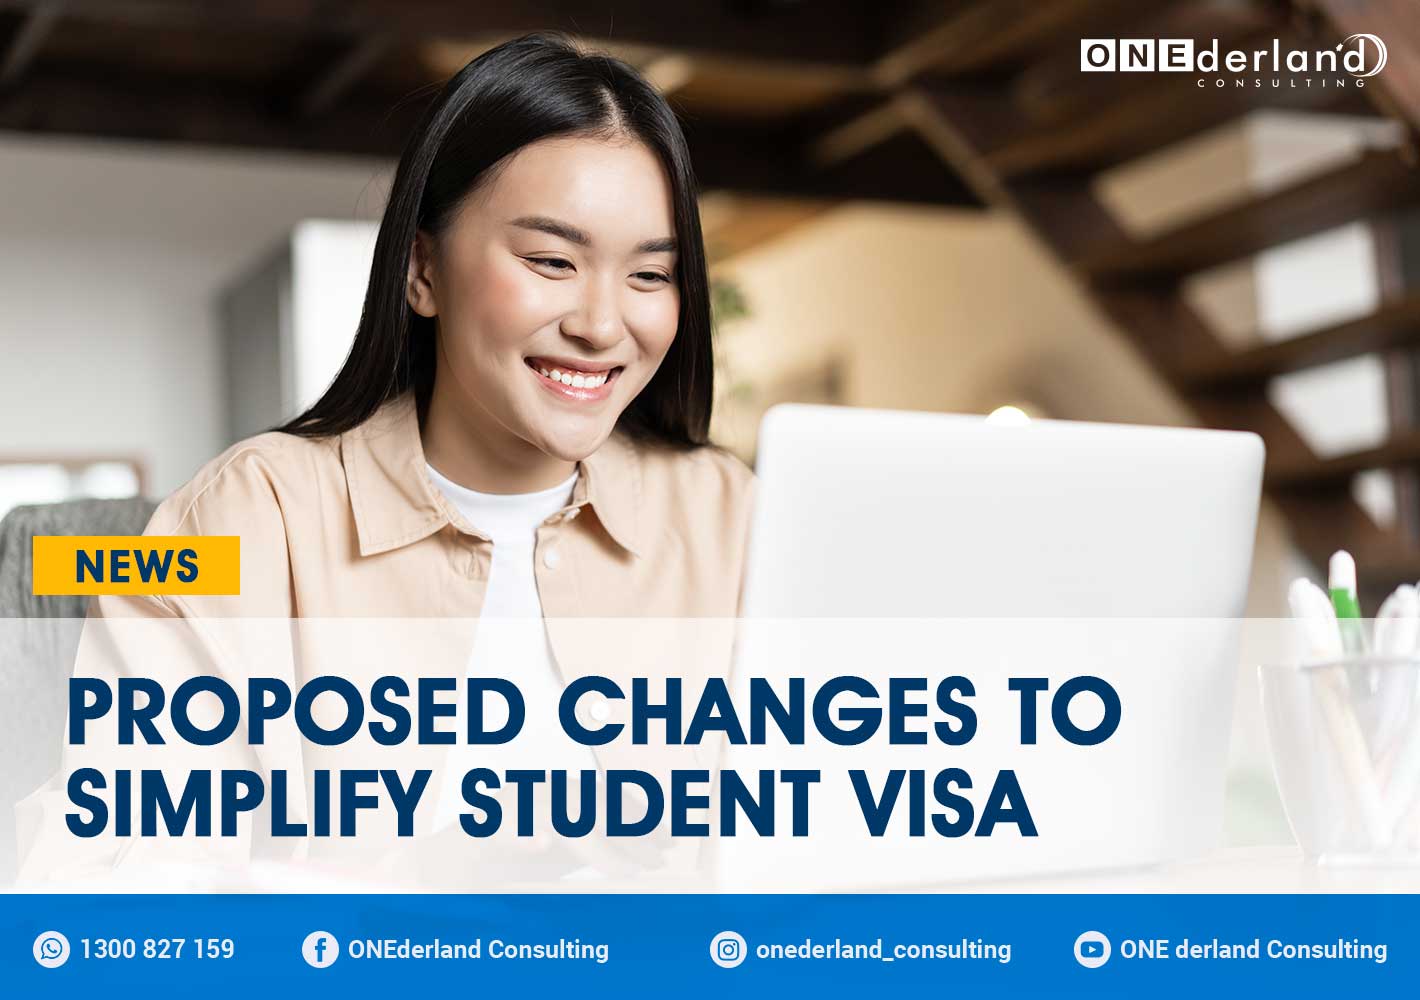 Proposed Changes to Simplify Student Visa